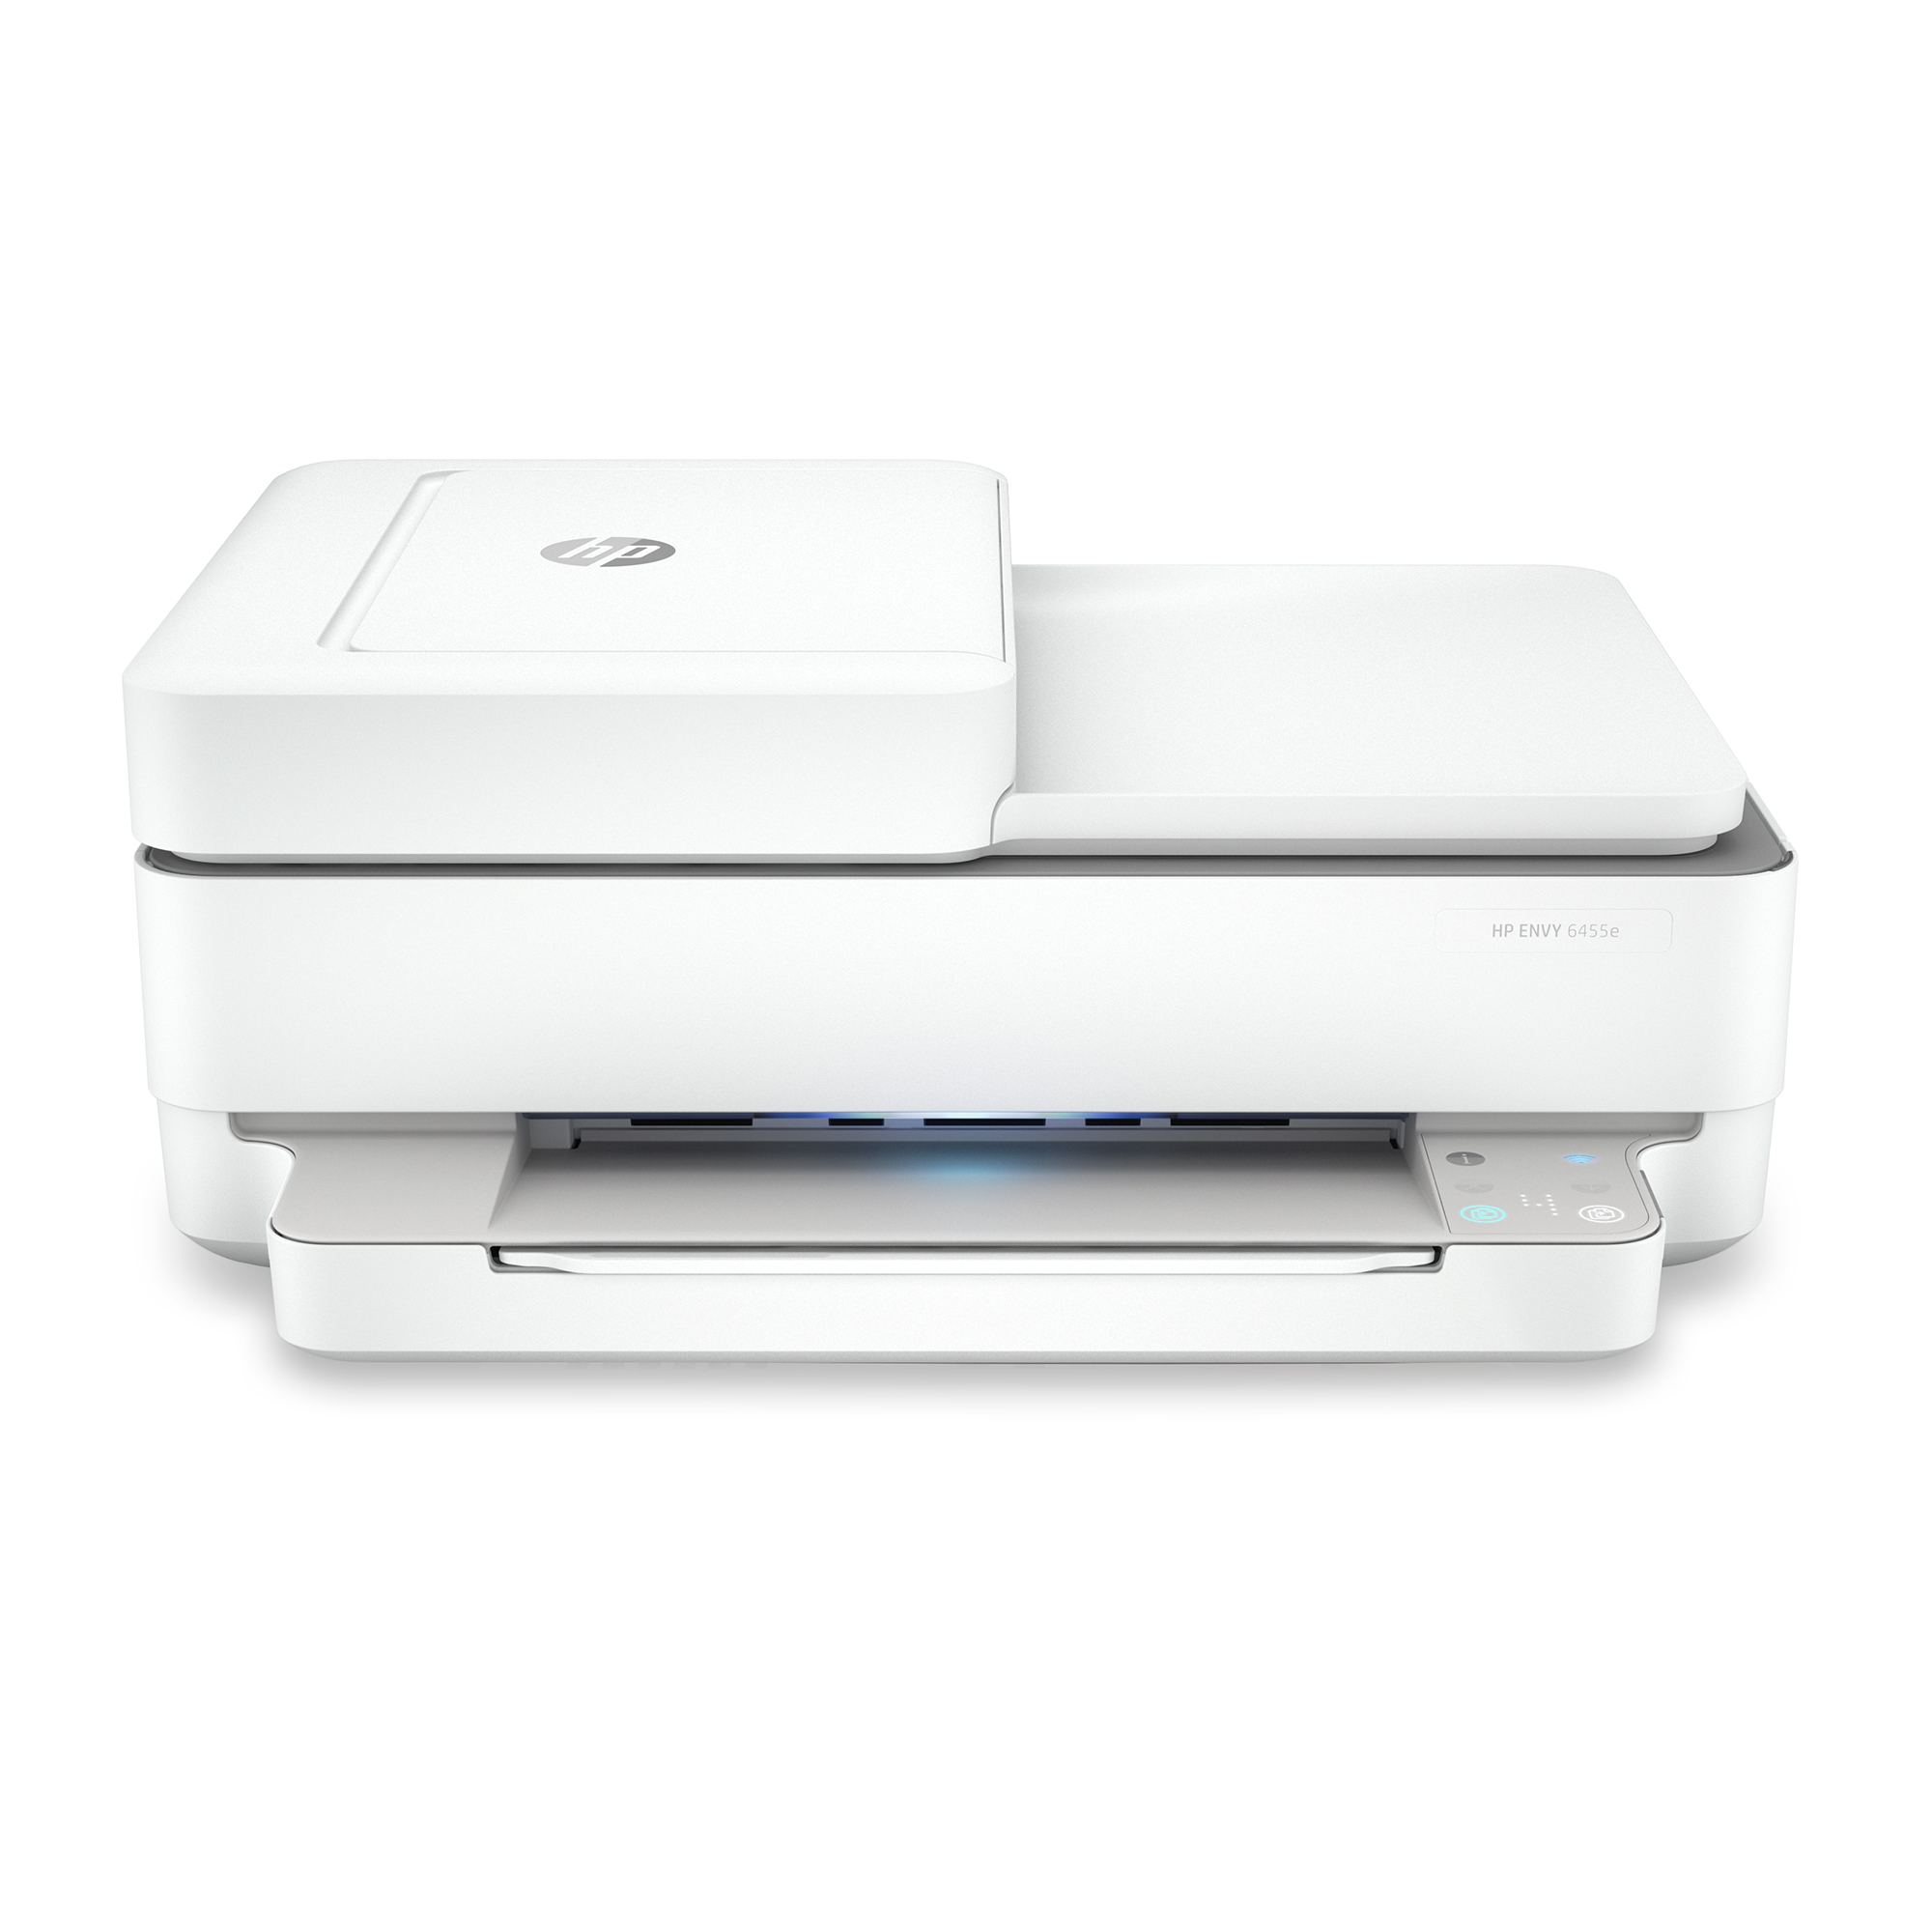 HP ENVY 6455e Wireless All in One Color Printer with 3 months Free